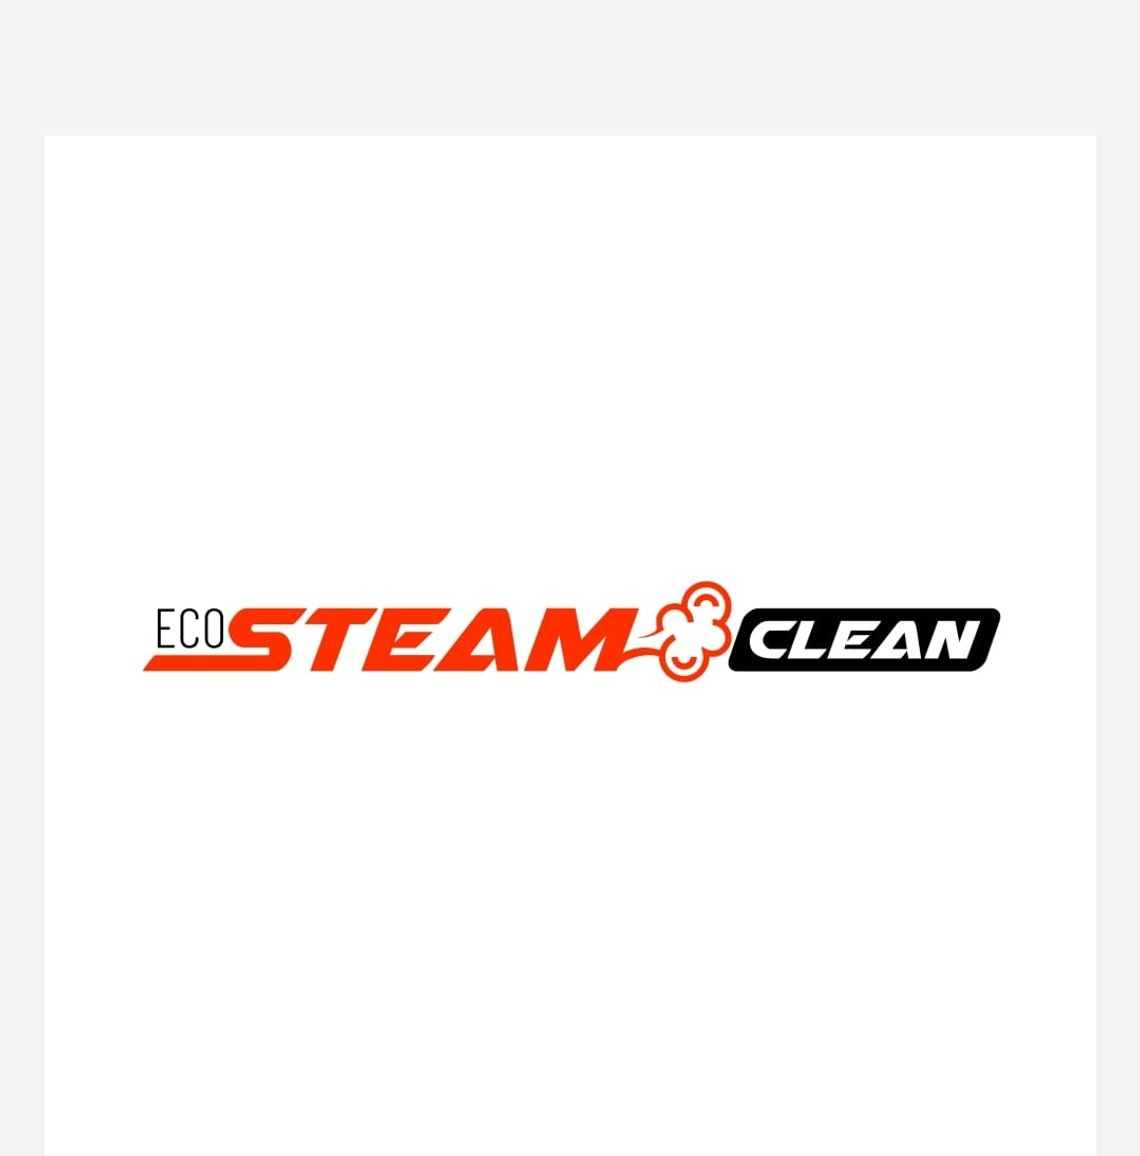 EcoSteamClean